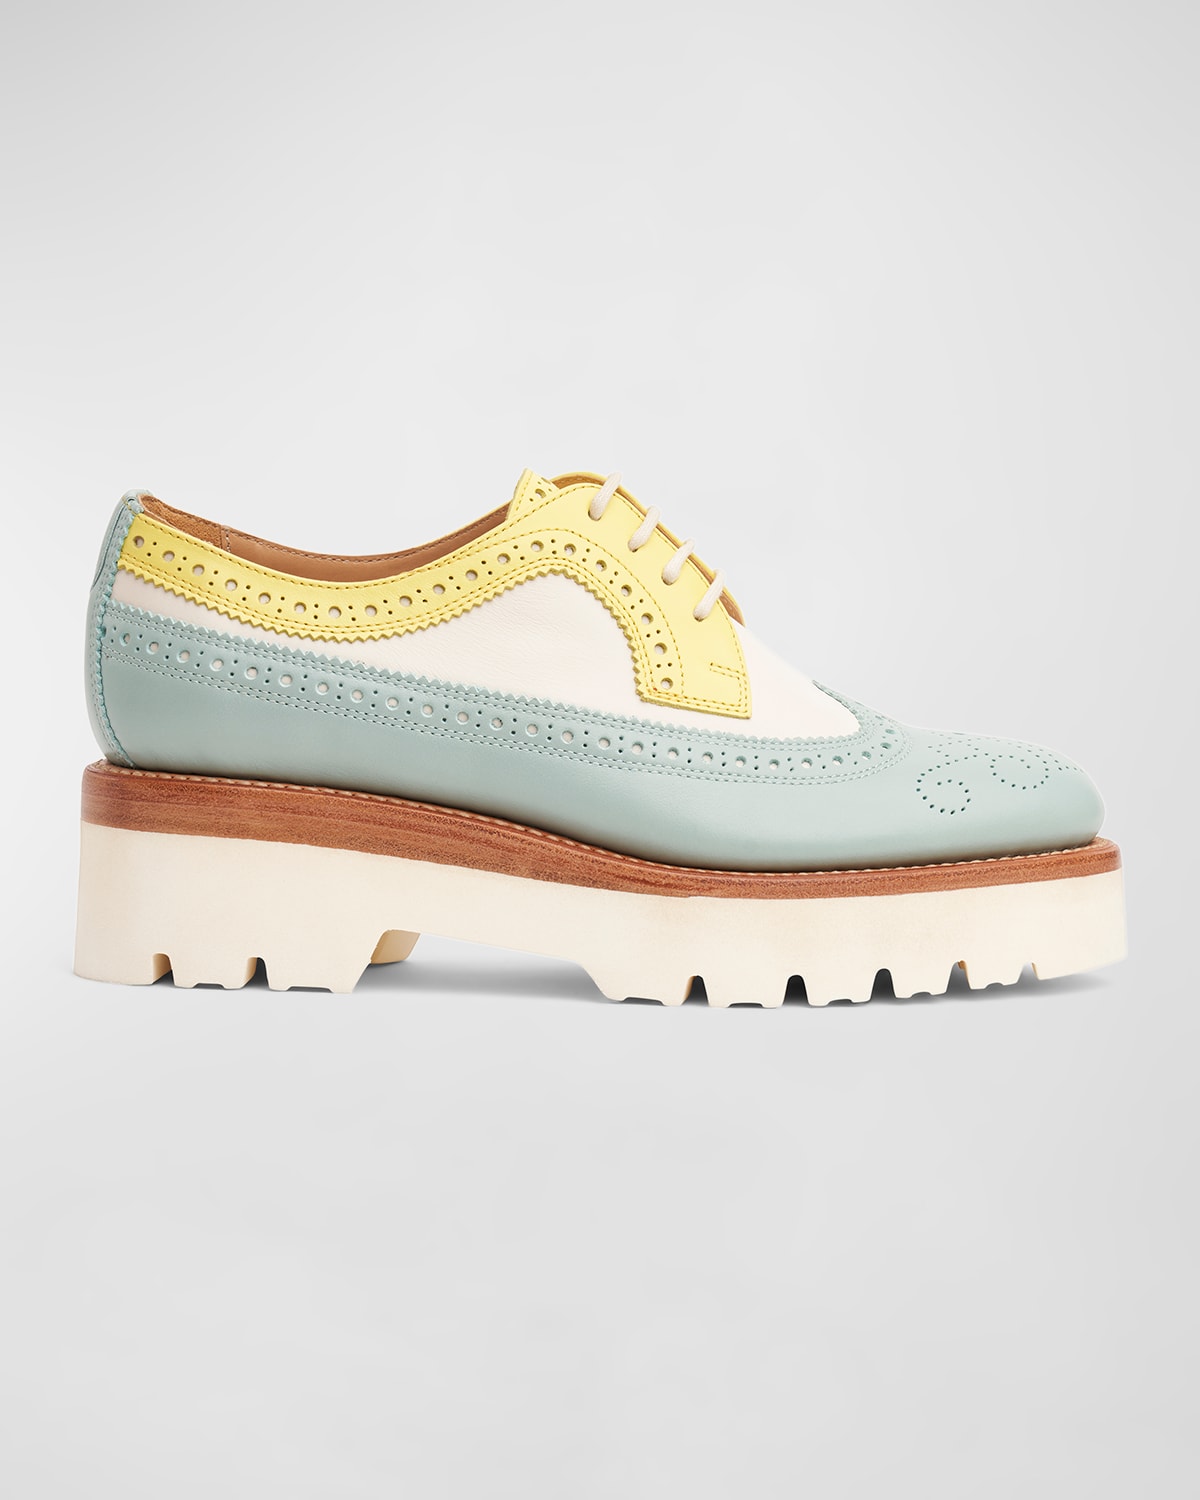 The Office Of Angela Scott Miss Lucy Multicolored Wing-tip Platform Loafers In Neon Seafoam